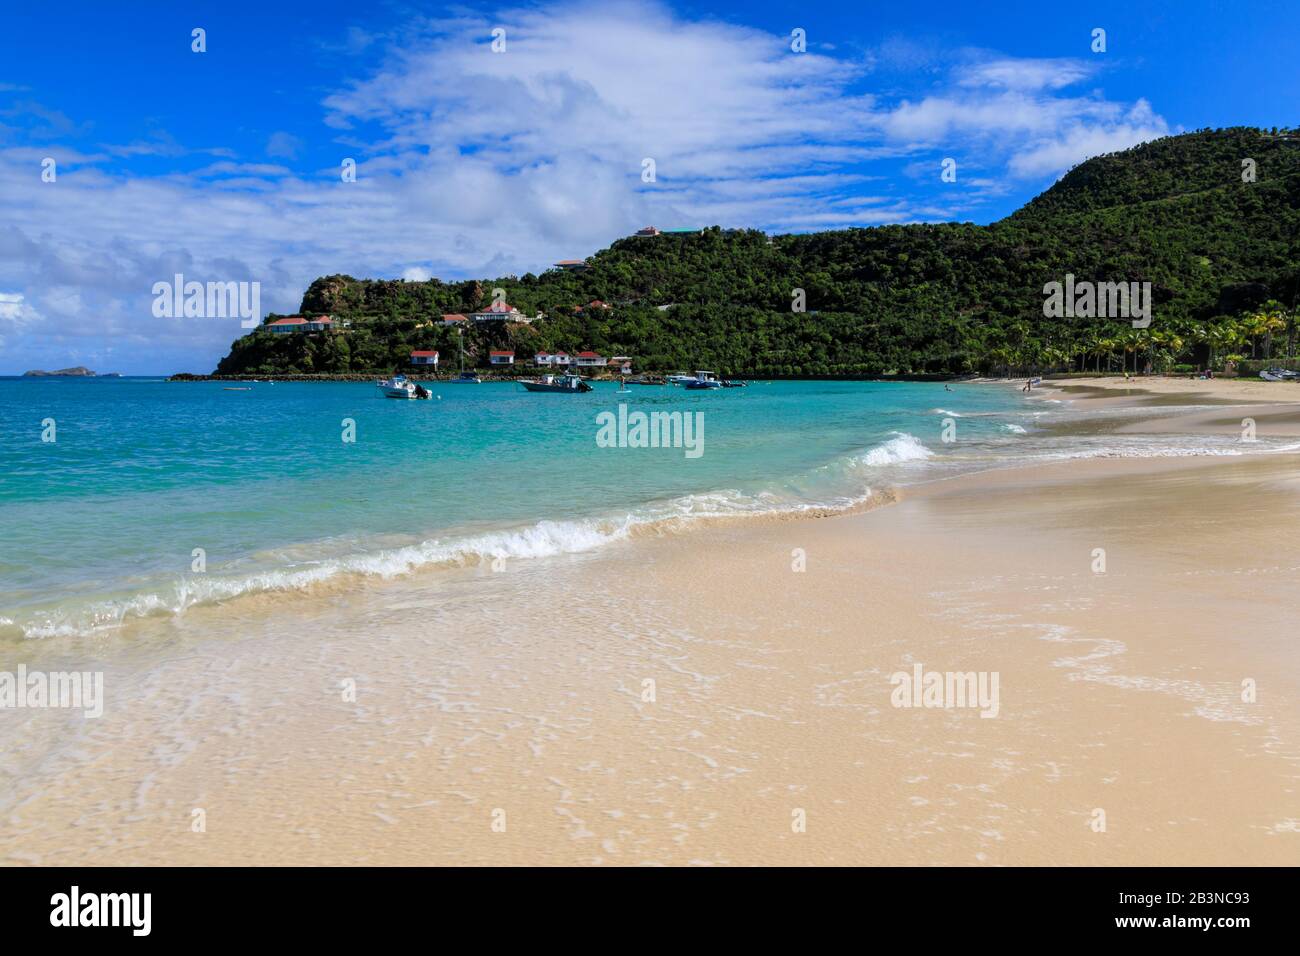 Beautiful turquoise sea and wooded hills, white sand St. Jean (Saint Jean) Beach, St. Barthelemy (St. Barts) (St. Barth), West Indies, Caribbean, Cent Stock Photo